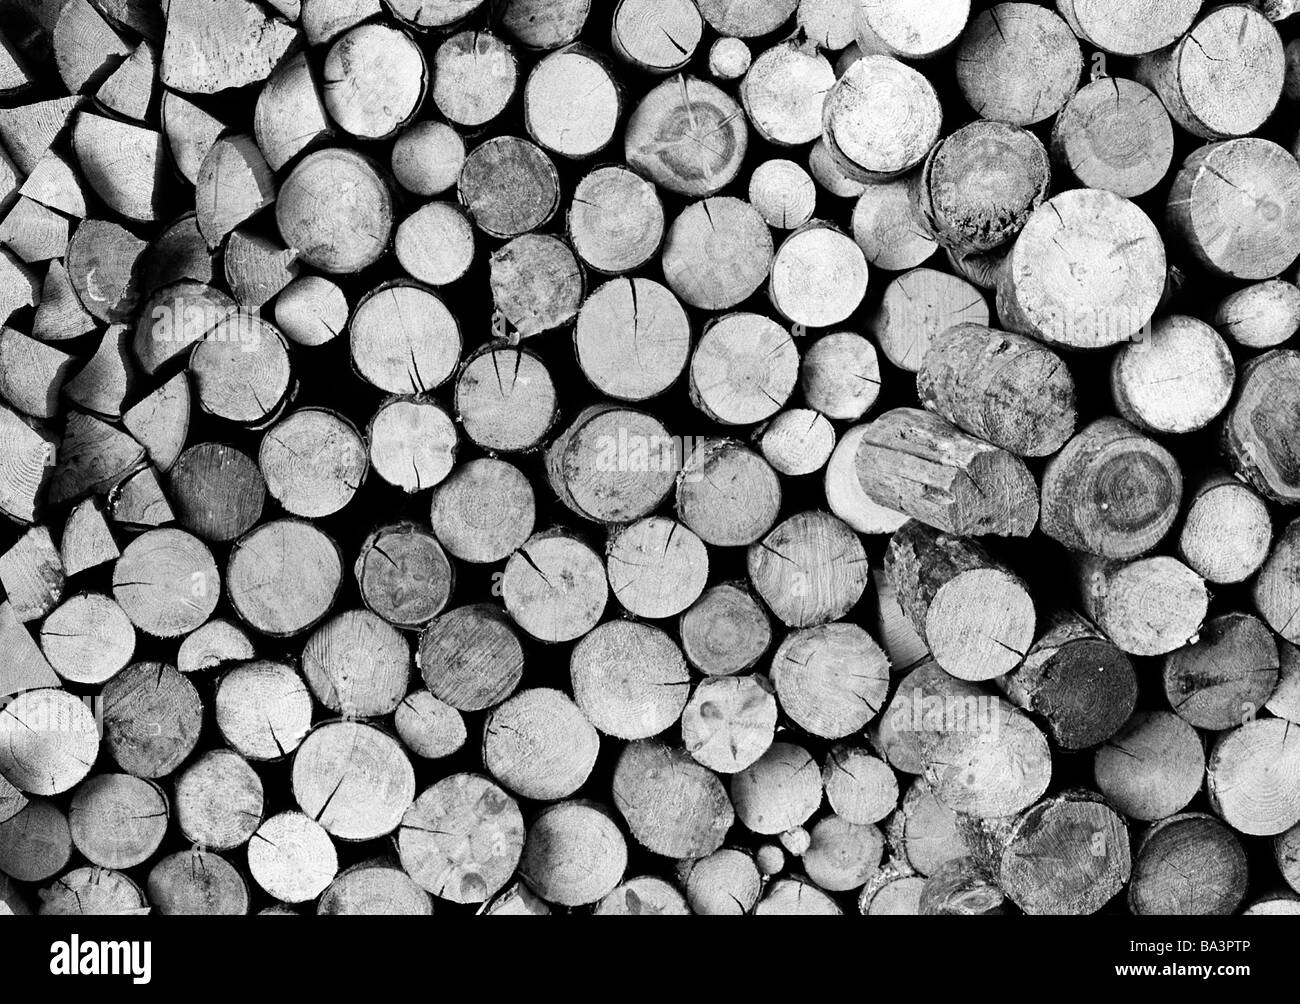 Eighties, black and white photo, deforestation, wood piling, tree logs, wooden blocks, firewood Stock Photo